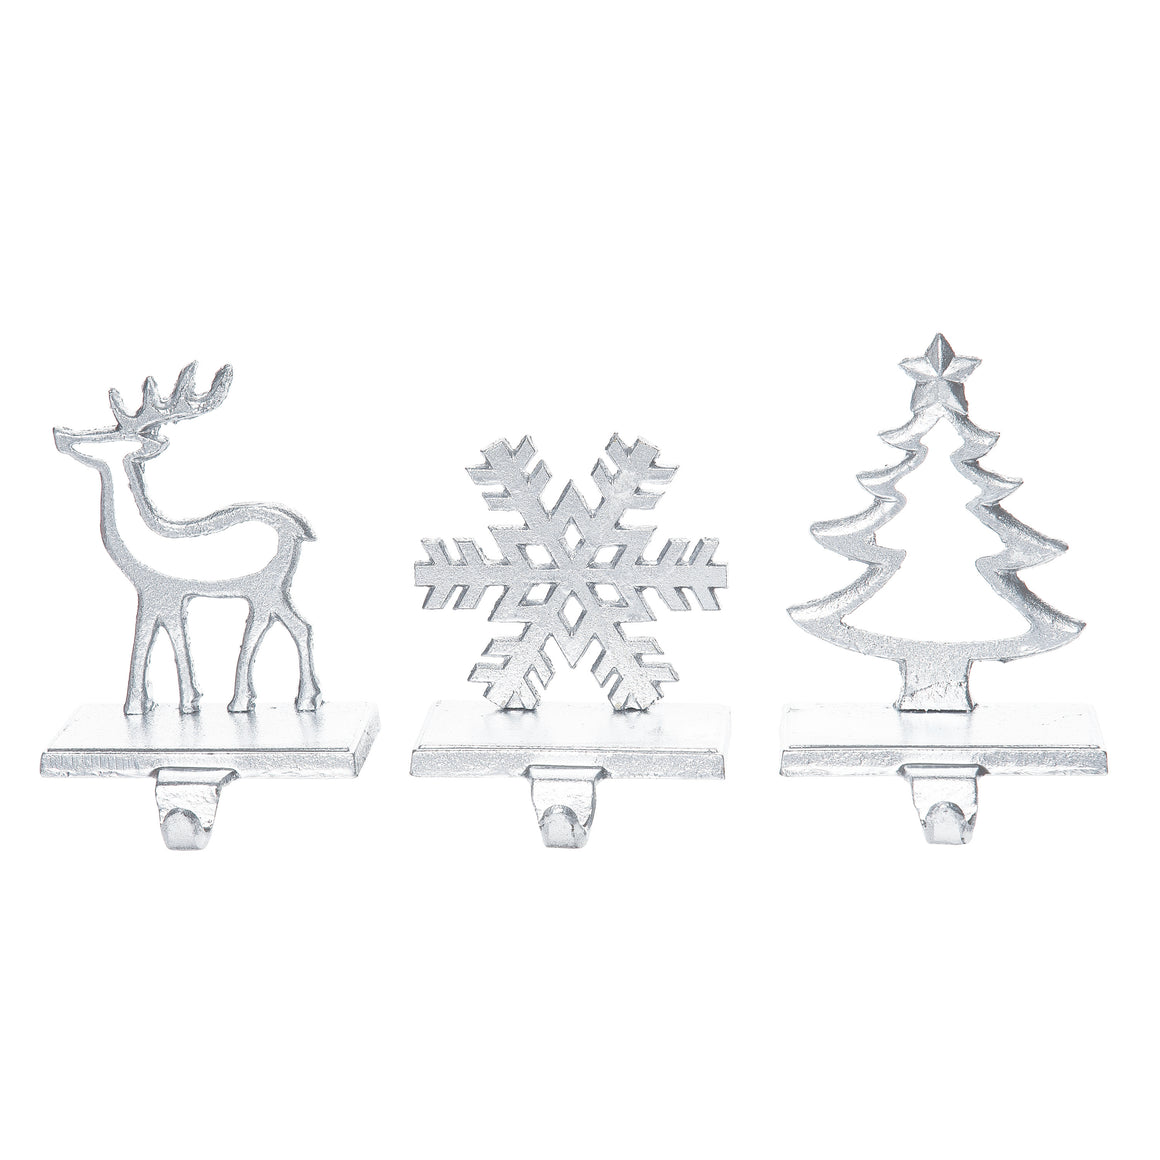 Set of 3 Silver Cast Iron Christmas Stocking Hangers - Stocking Holders Reindeer, Snowflake and Tree - 5 Inches to 6-1/2 Inches High, Heavy Weighted 1.4 Pounds Each